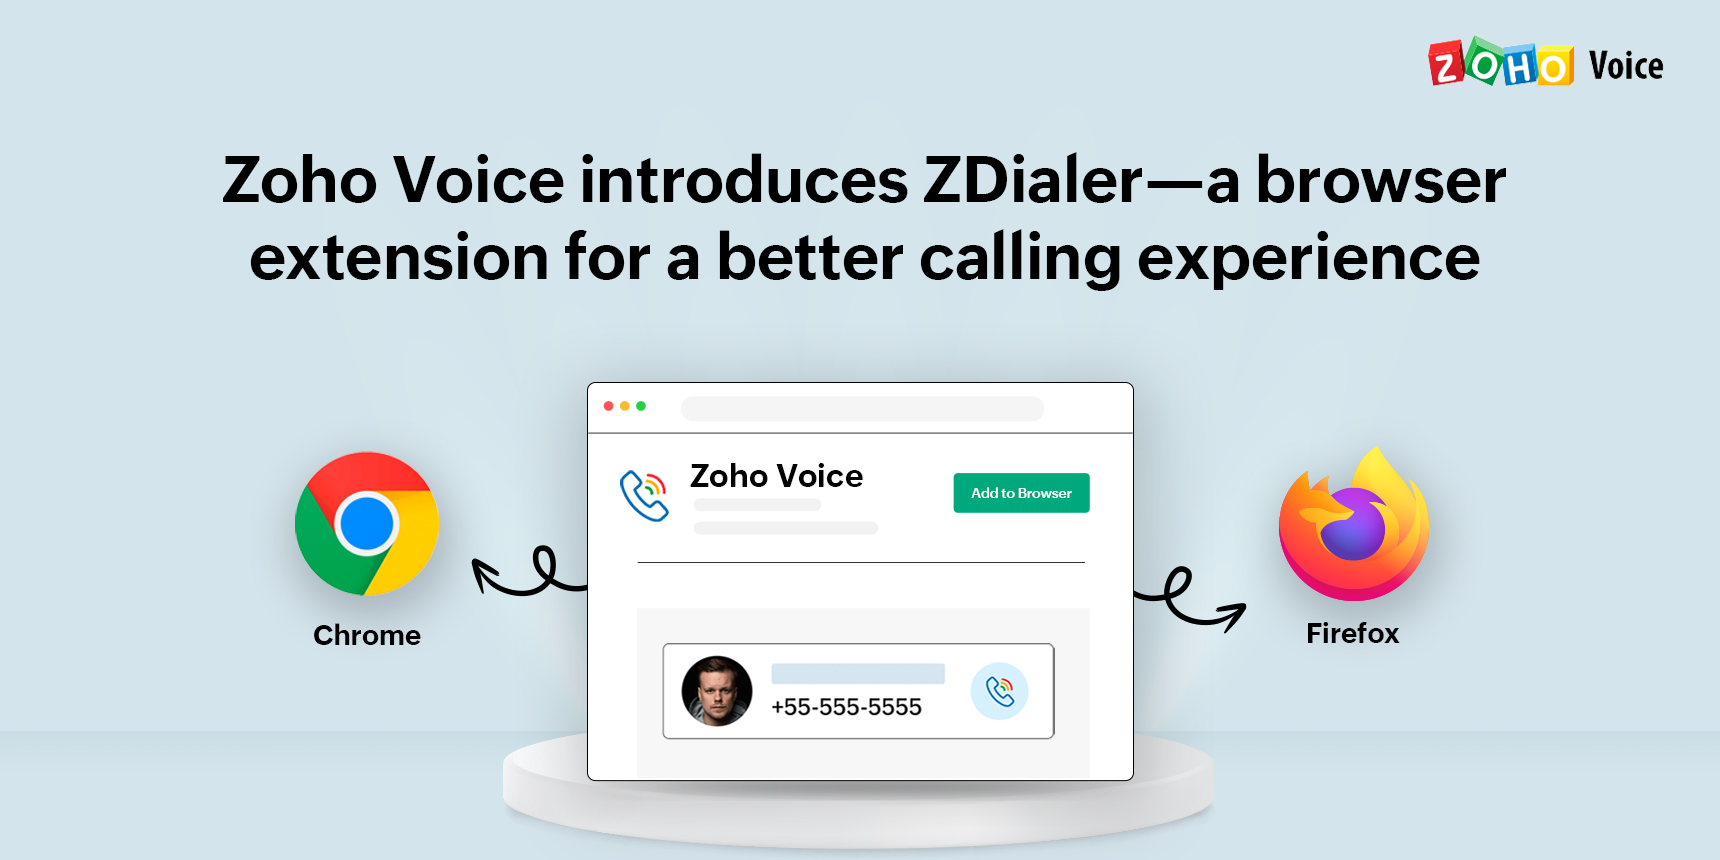 Introducing ZDialer—a browser extension for a better calling experience